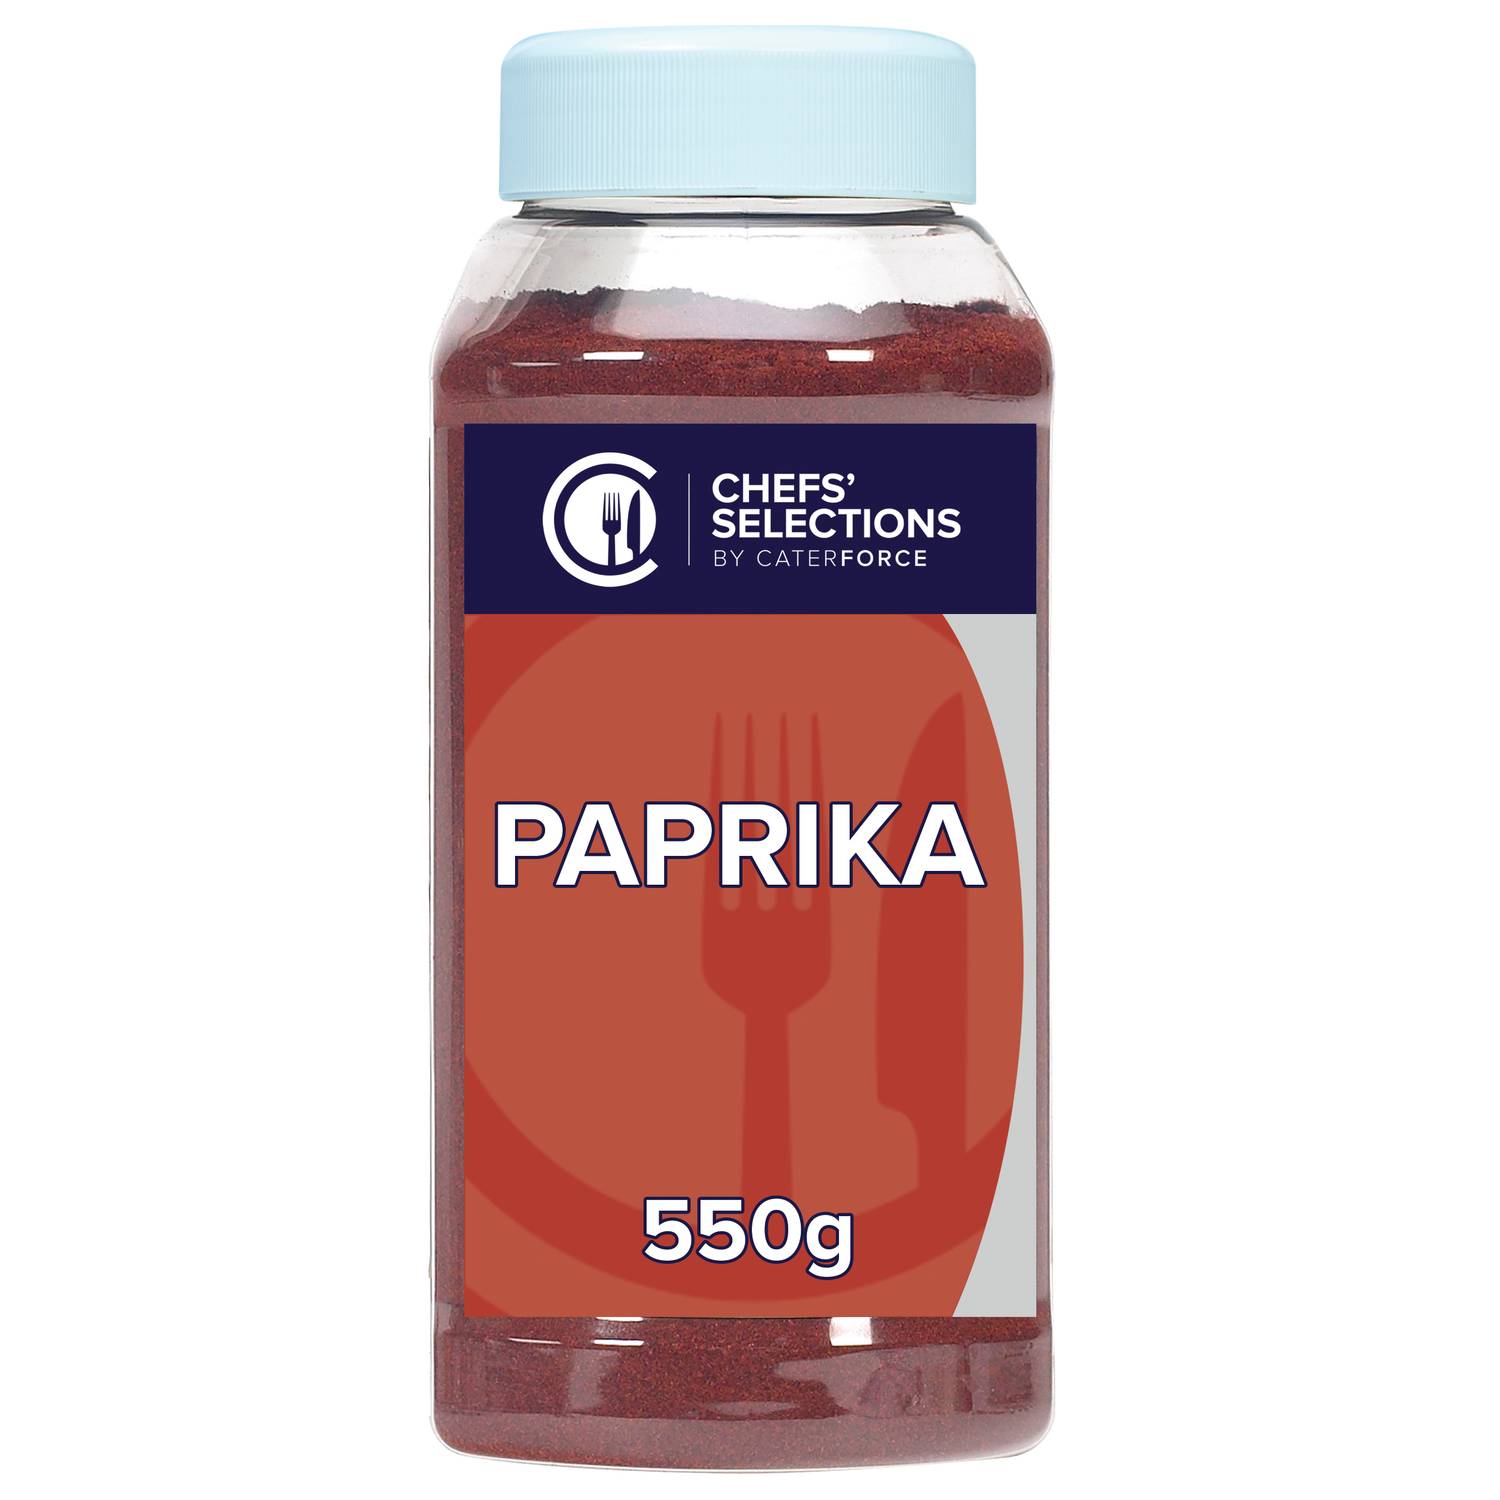 Chefs’ Selections Paprika (6 x 550g)